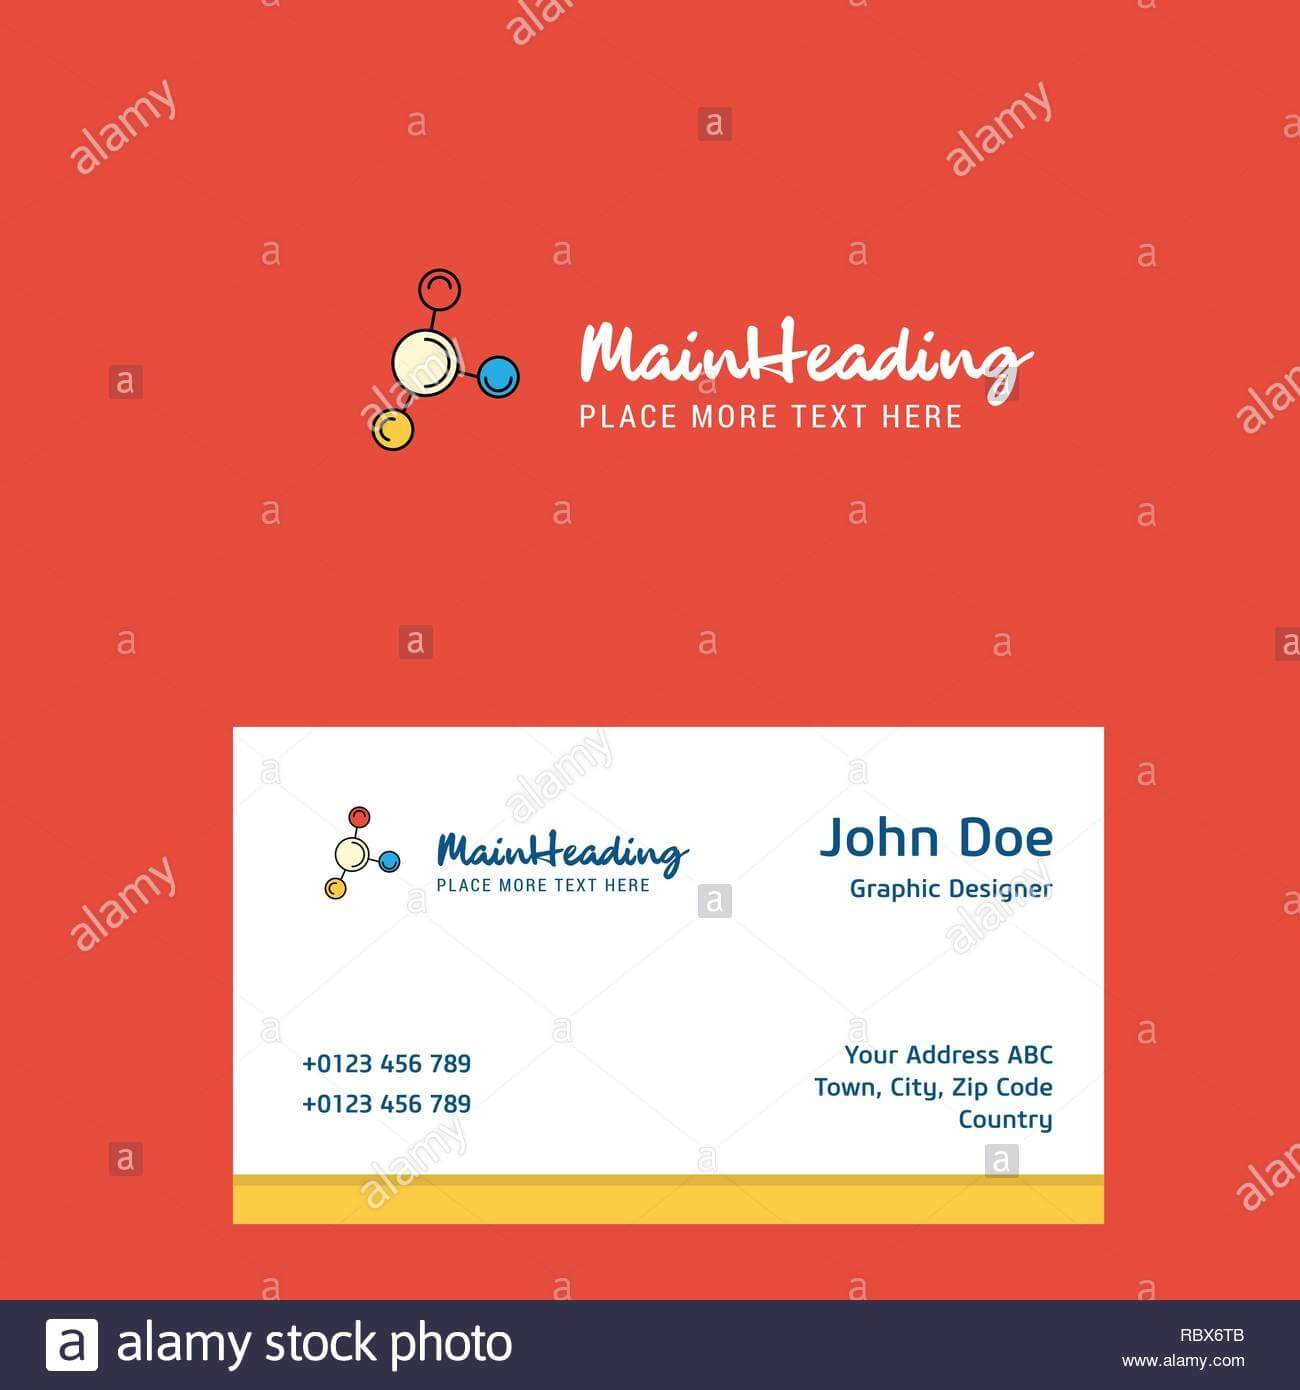 Networking Logo Design With Business Card Template. Elegant Within Networking Card Template